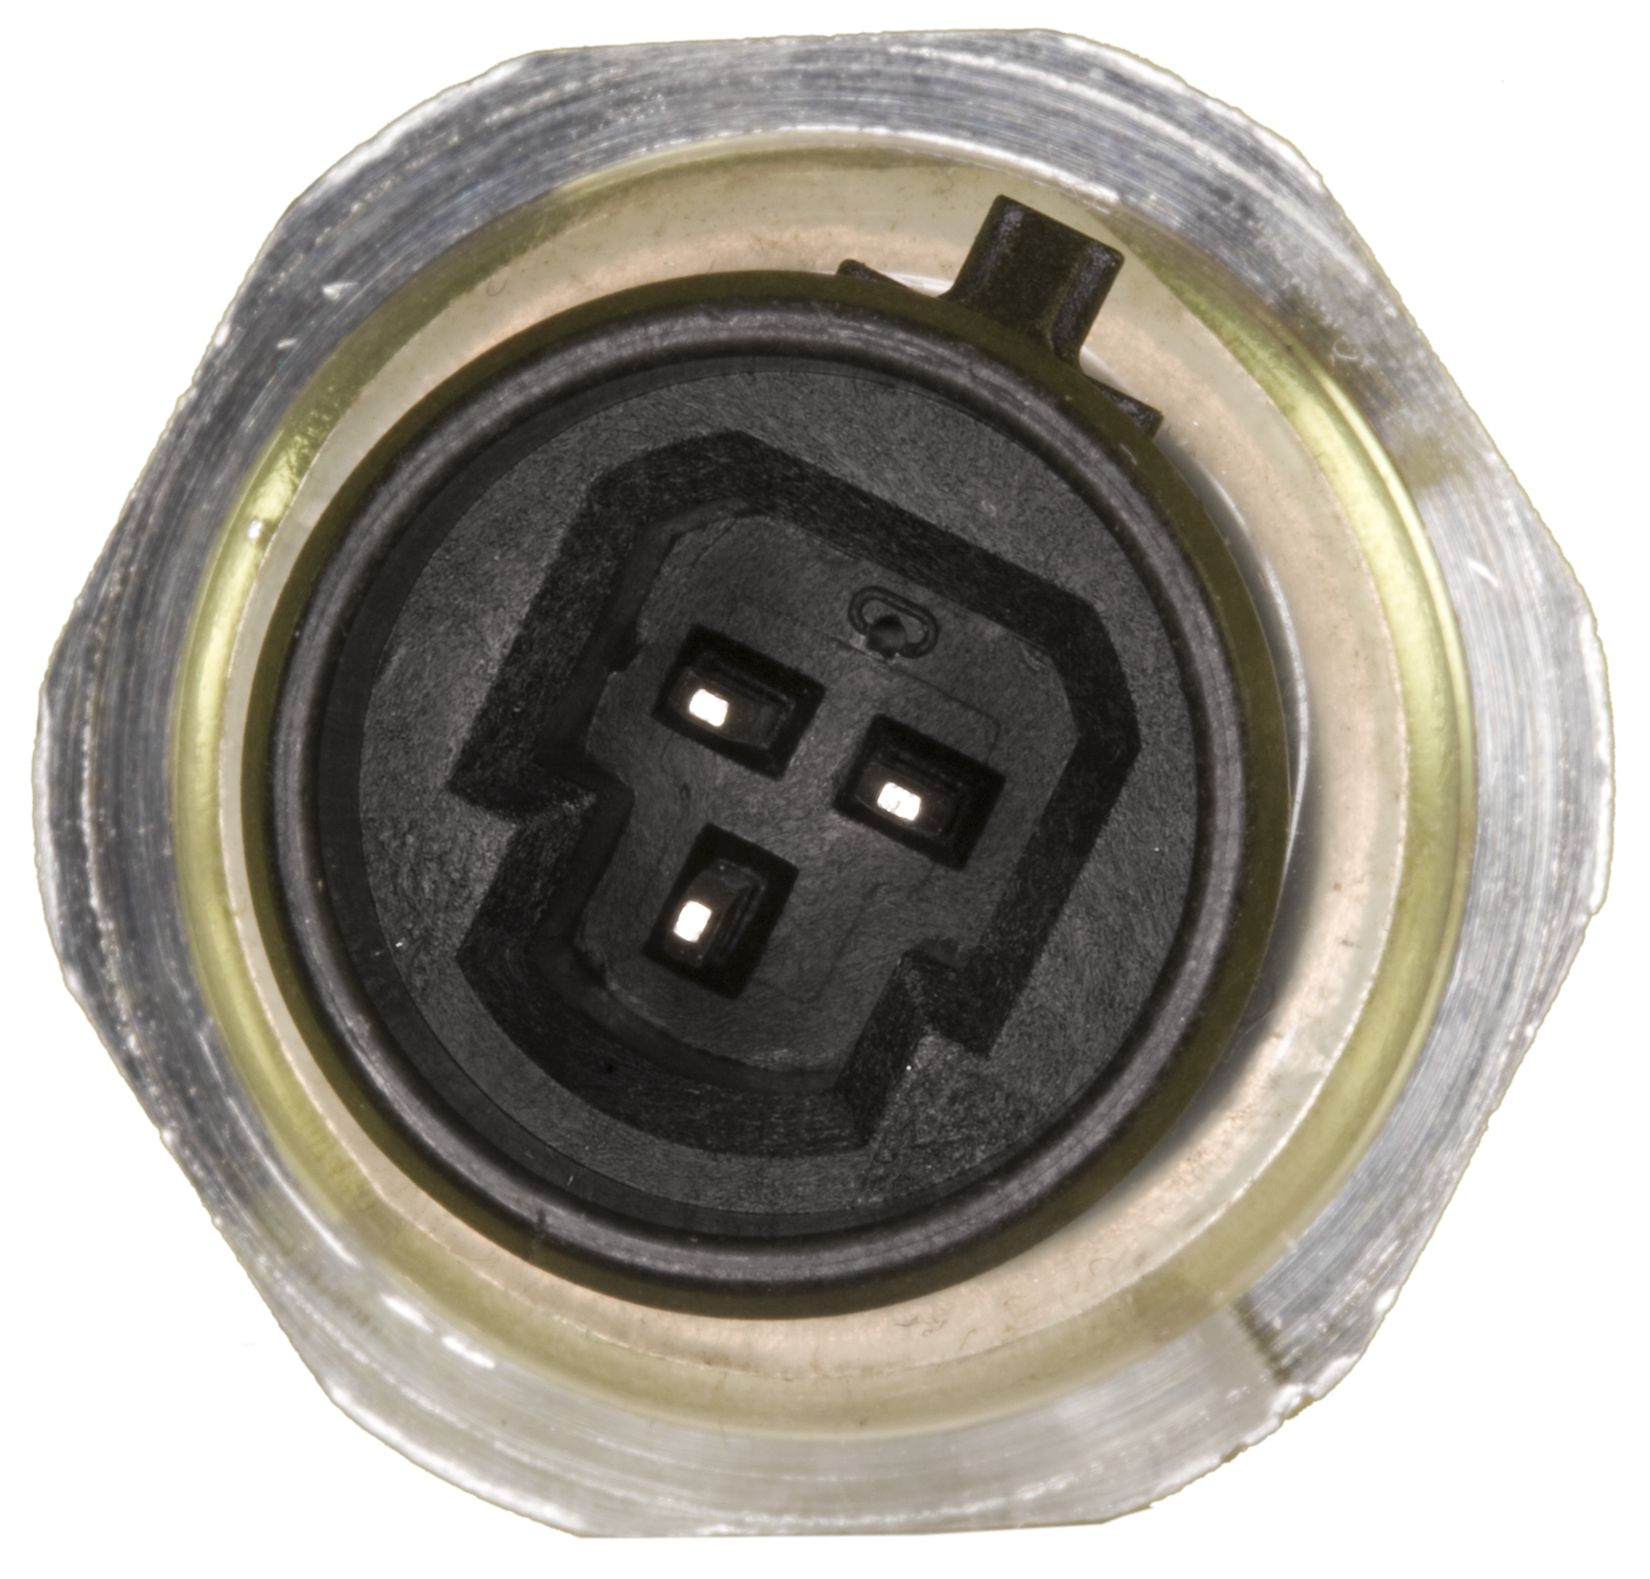 Standard Motor Products PS417 Ramco Automotive Engine Oil Pressure Switch Compatible with Wells PS561 RA-OPS1059 